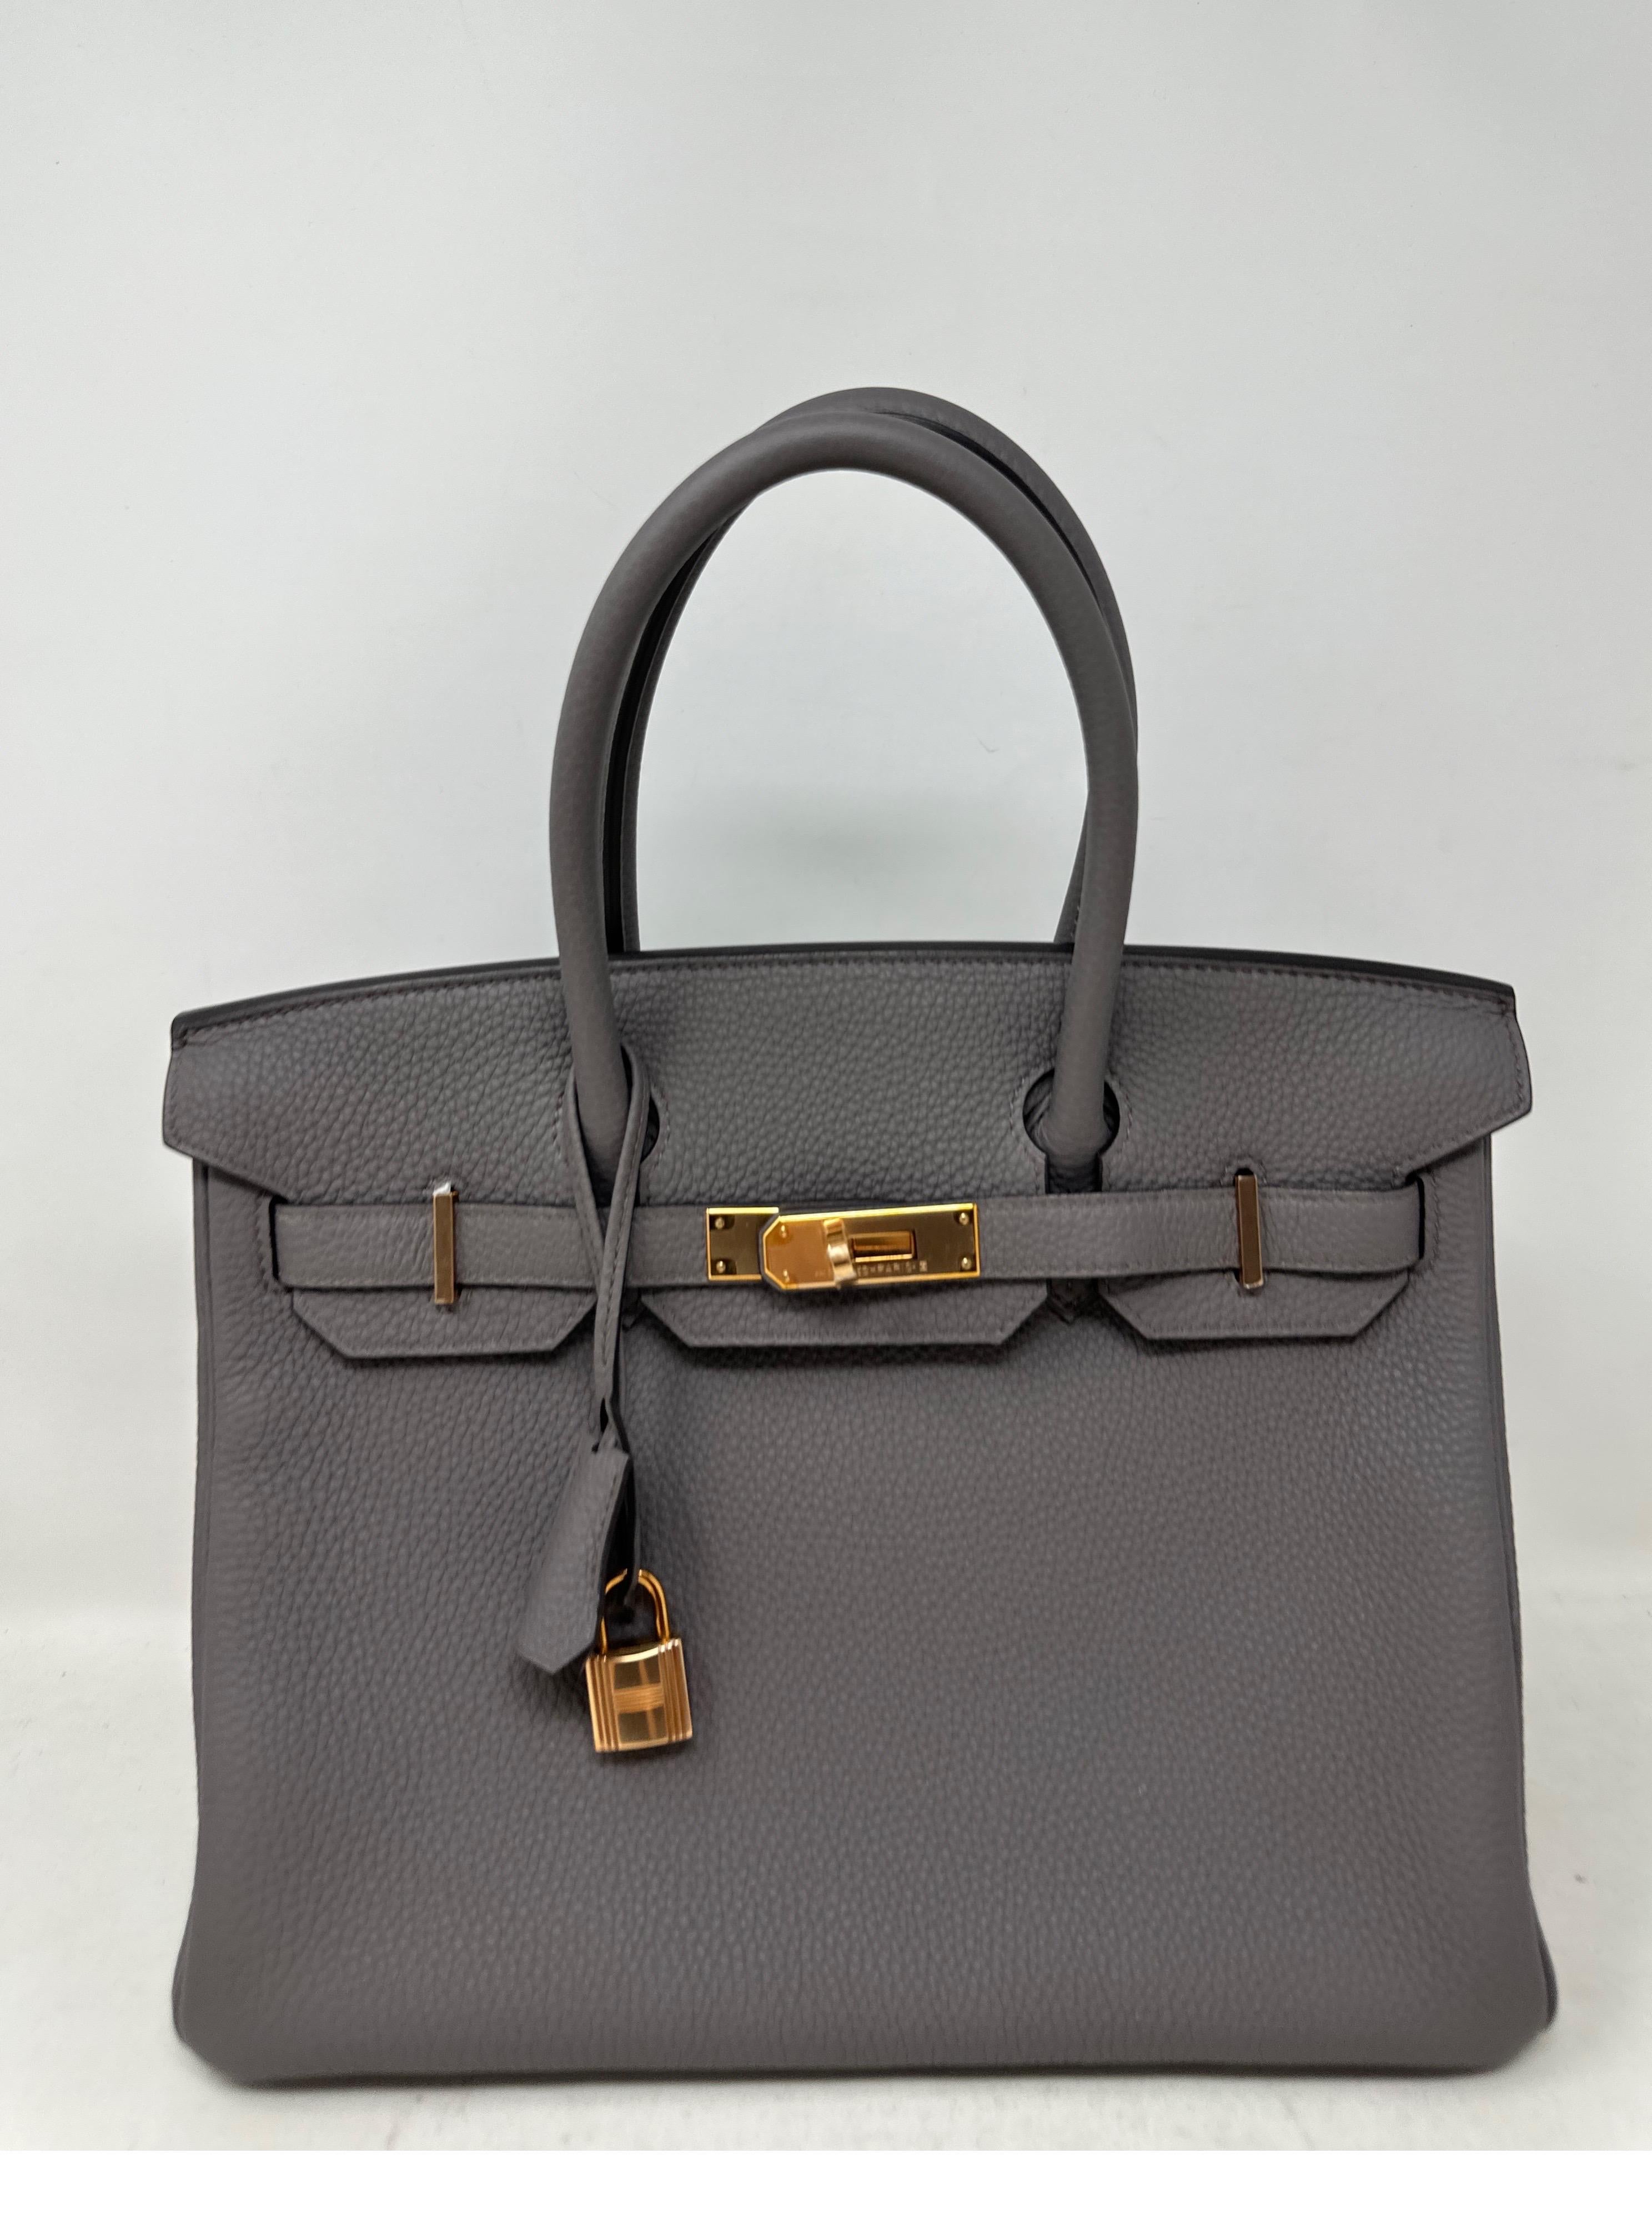 Hermes Etain Birkin 30 Bag. Rose gold hardware. Beautiful grey etain color togo leather bag. Rare combination color with hardware. New from 2019. Full set. Includes clochette, lock, keys, dust bag and box.  Guaranteed authentic. Great investment